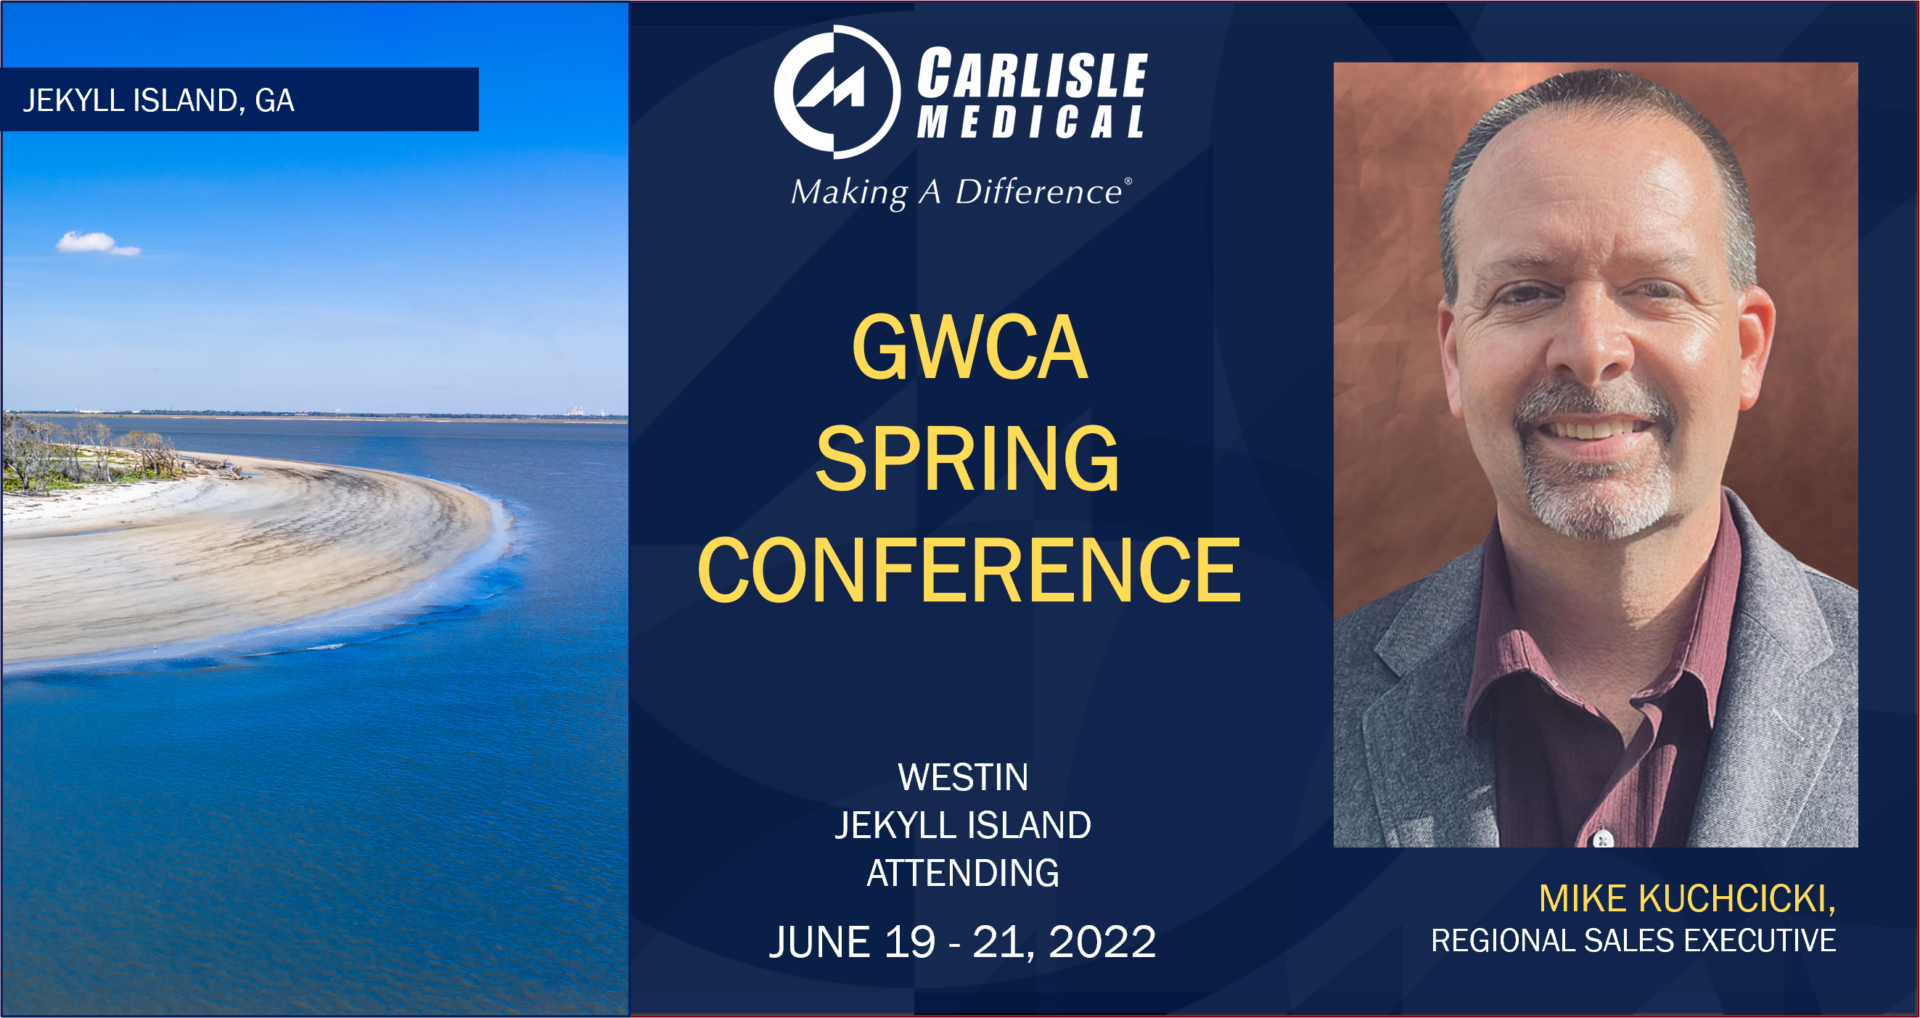 Carlisle Medical Will Be Attending The GWCA Spring Conference